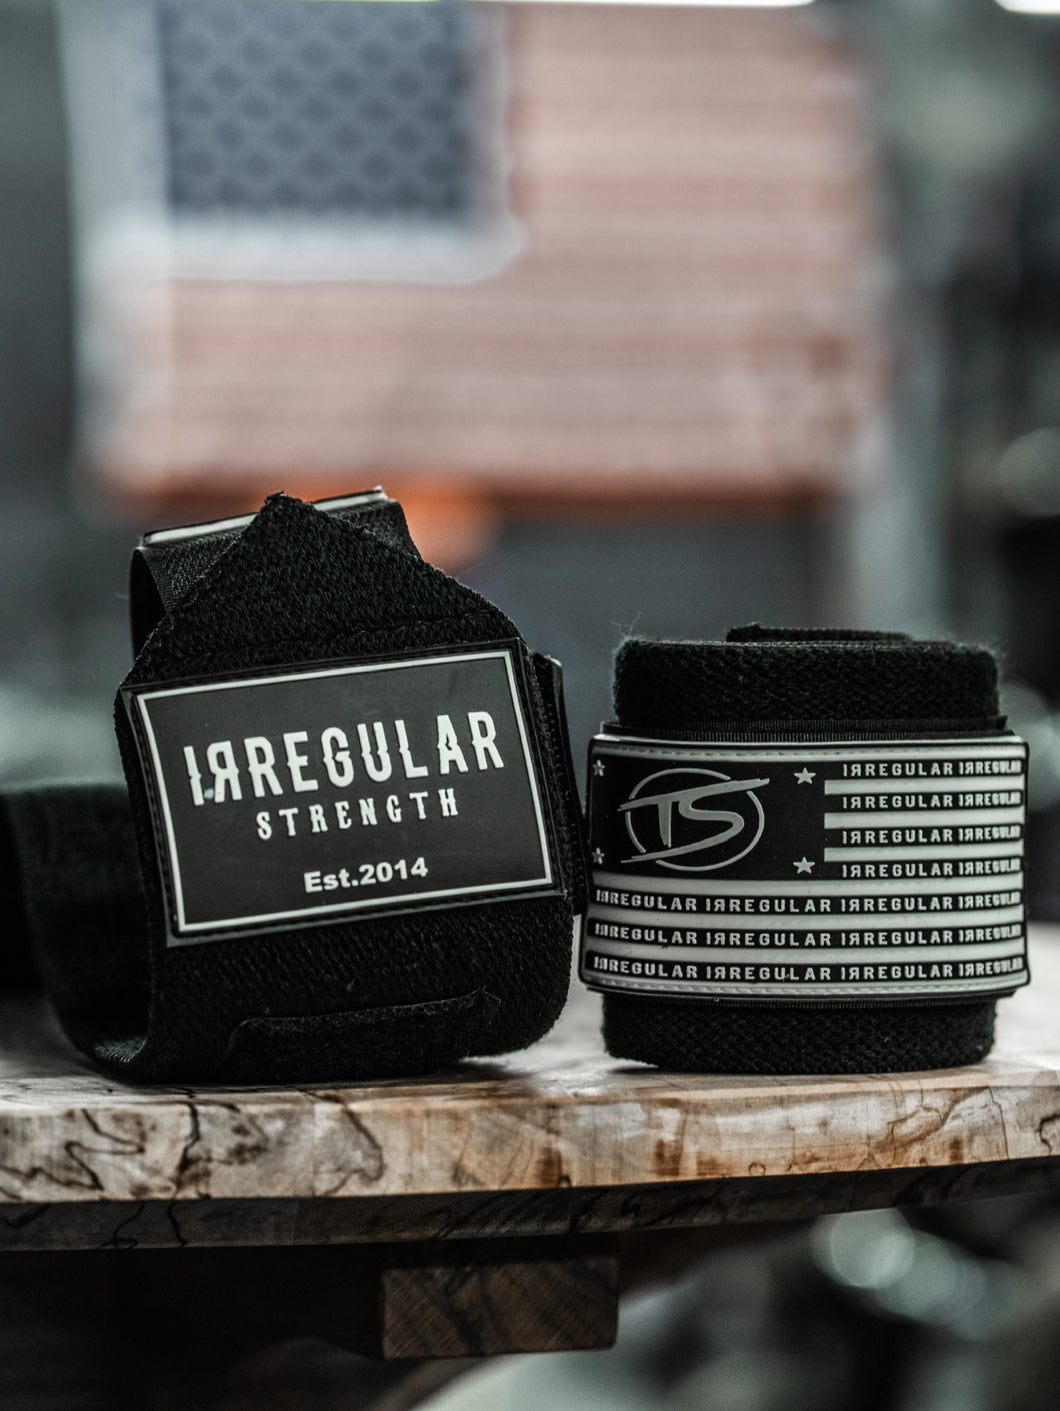 “The OG's” Limited Edition Wrist Wraps